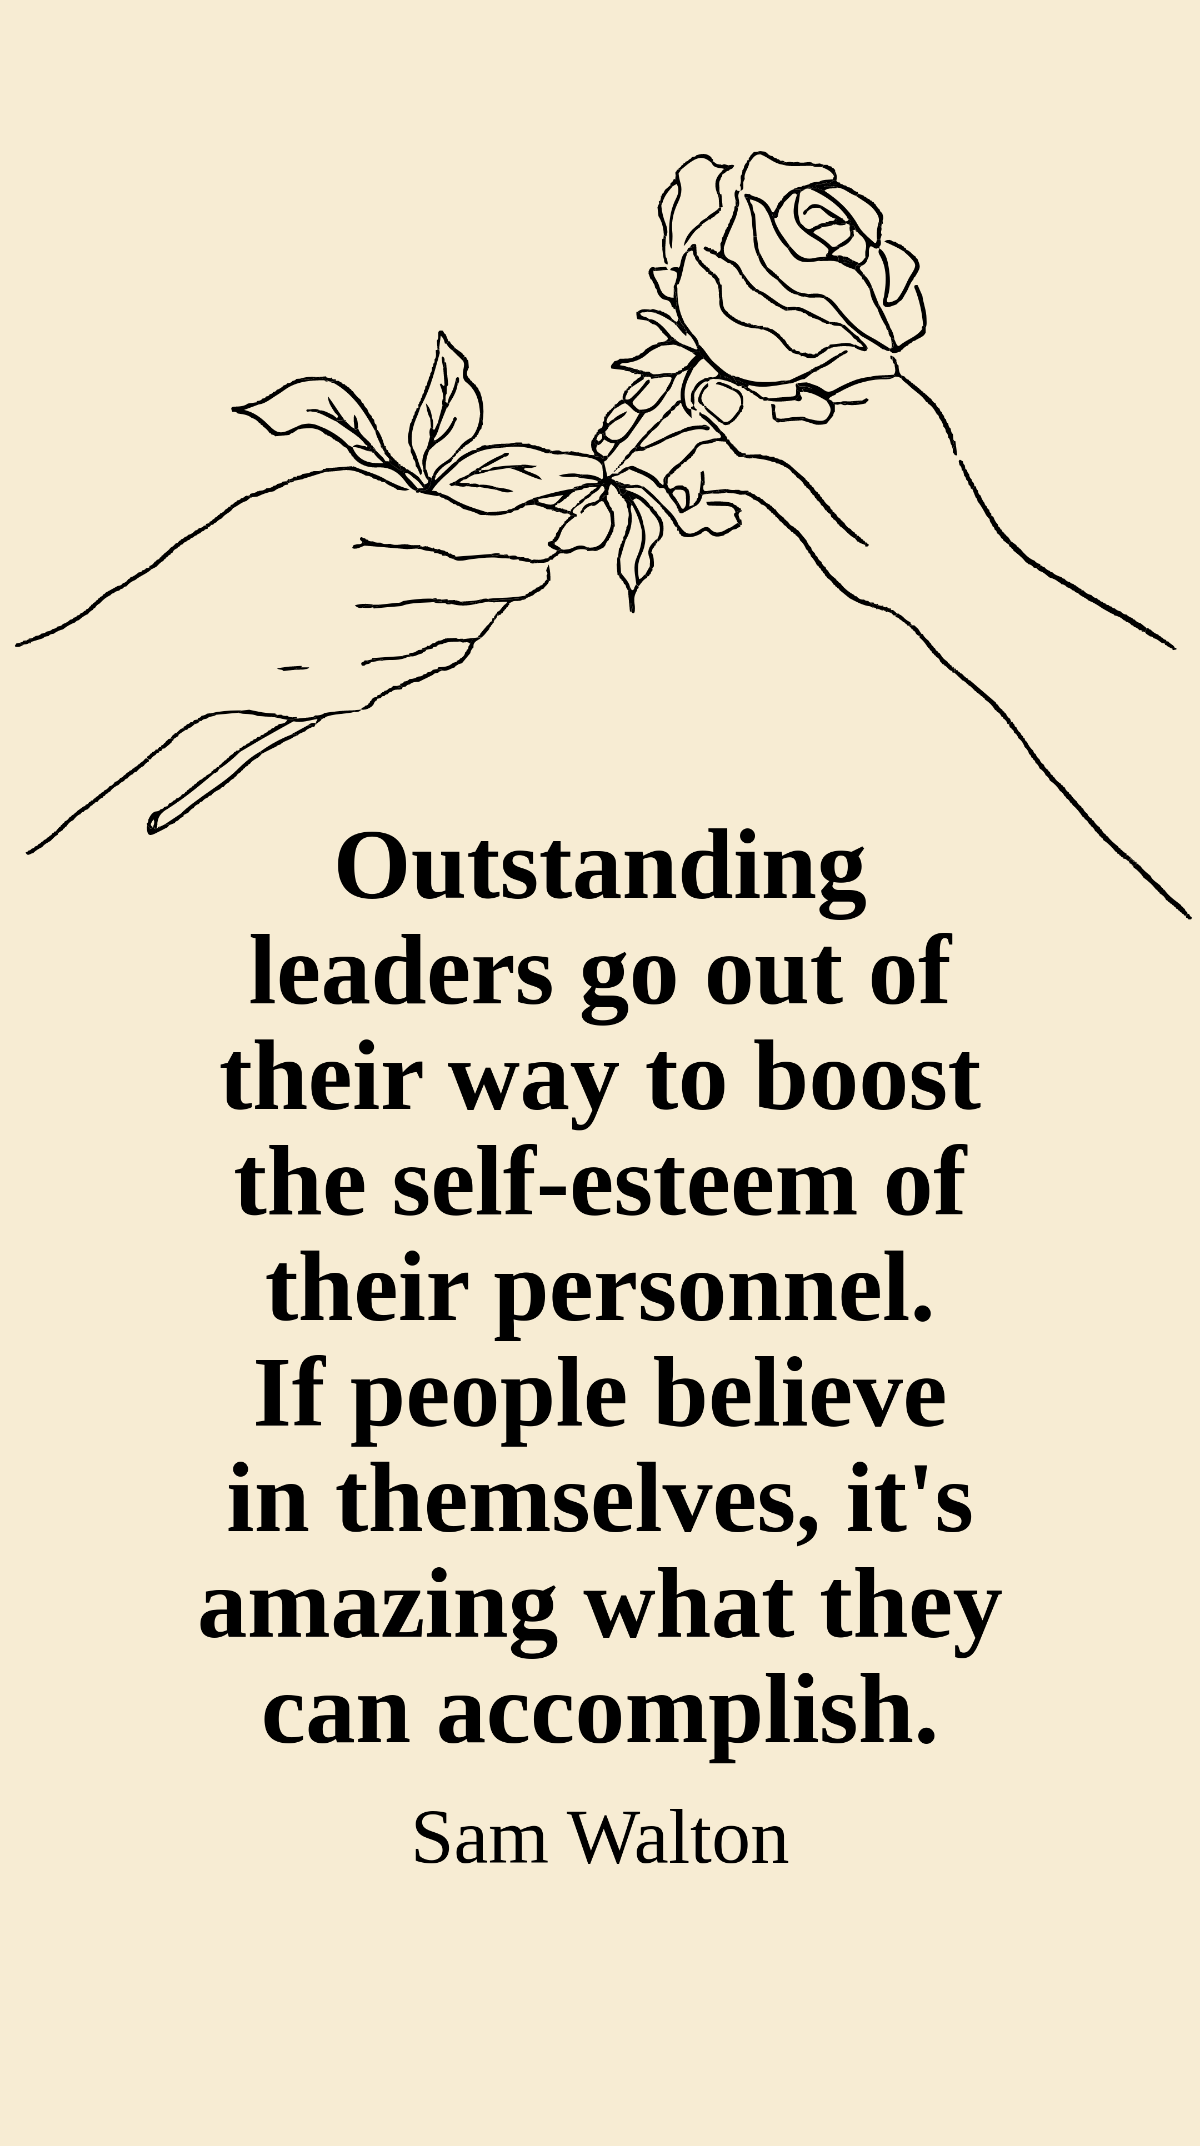 Sam Walton - Outstanding leaders go out of their way to boost the self-esteem of their personnel. If people believe in themselves, it's amazing what they can accomplish. Template